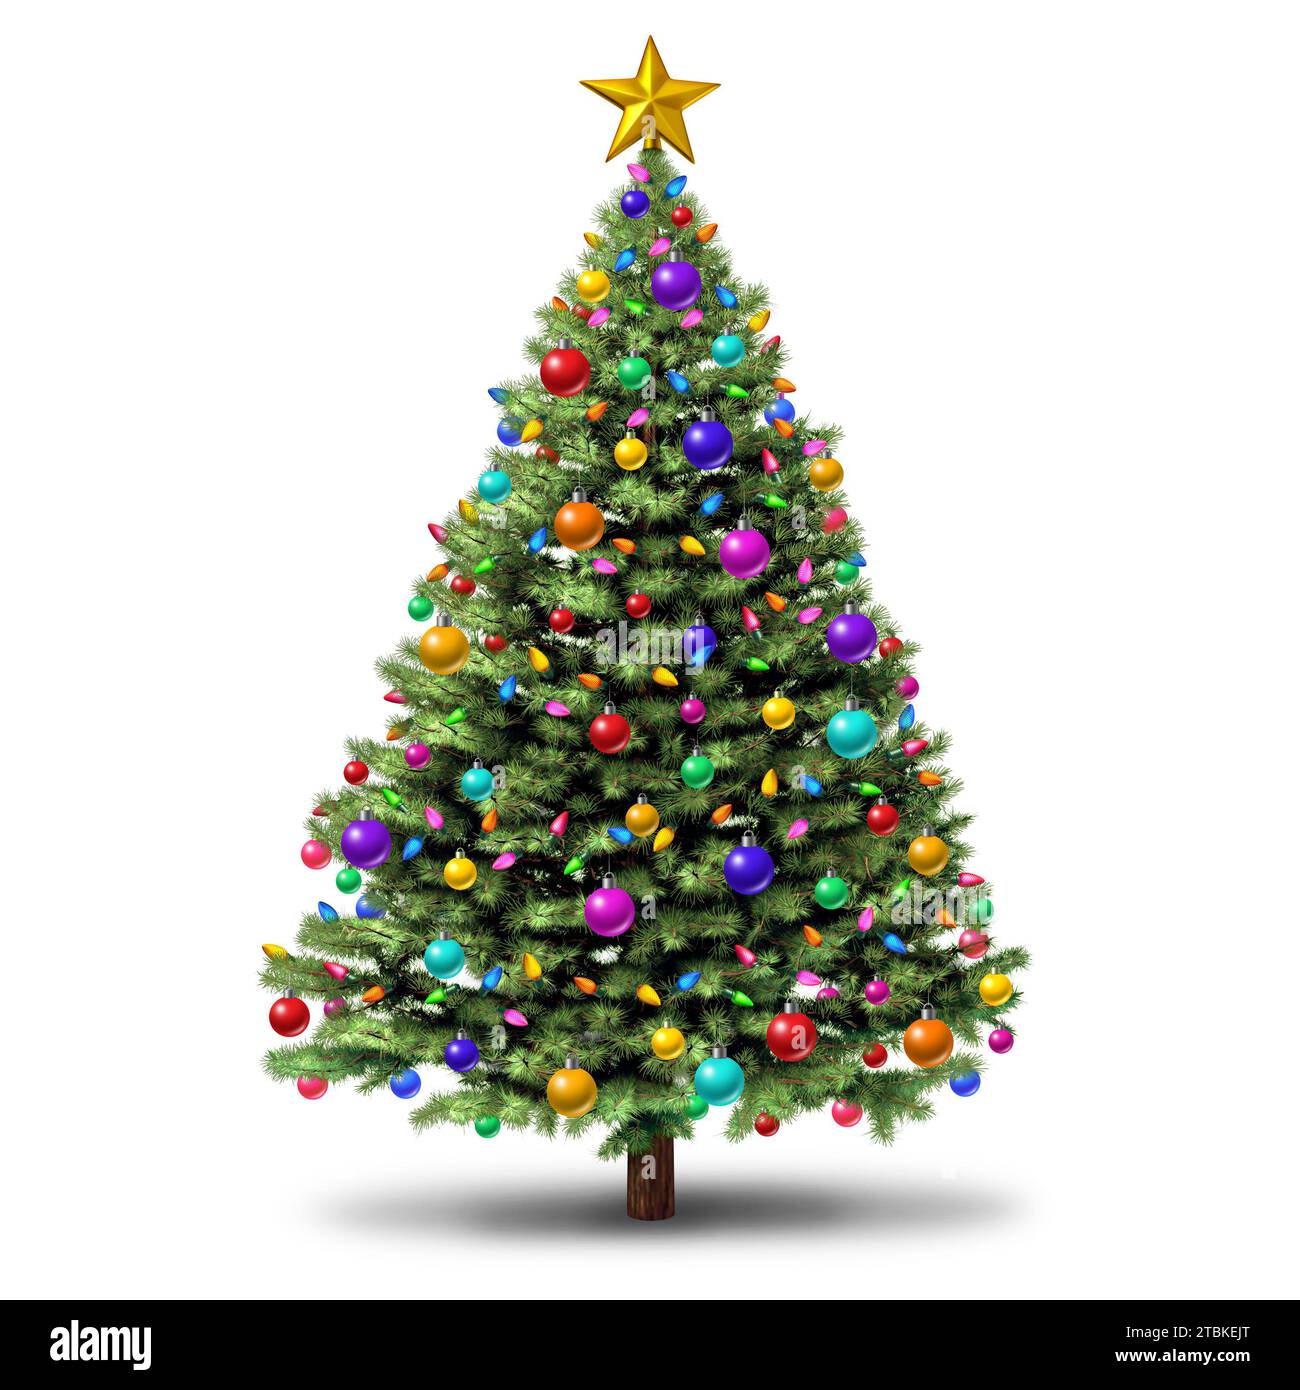 Christmas-Tree and Happy New Year-party celebration isolated on a white background with decorations as a festive evergreen single plant with detailed Stock Photo